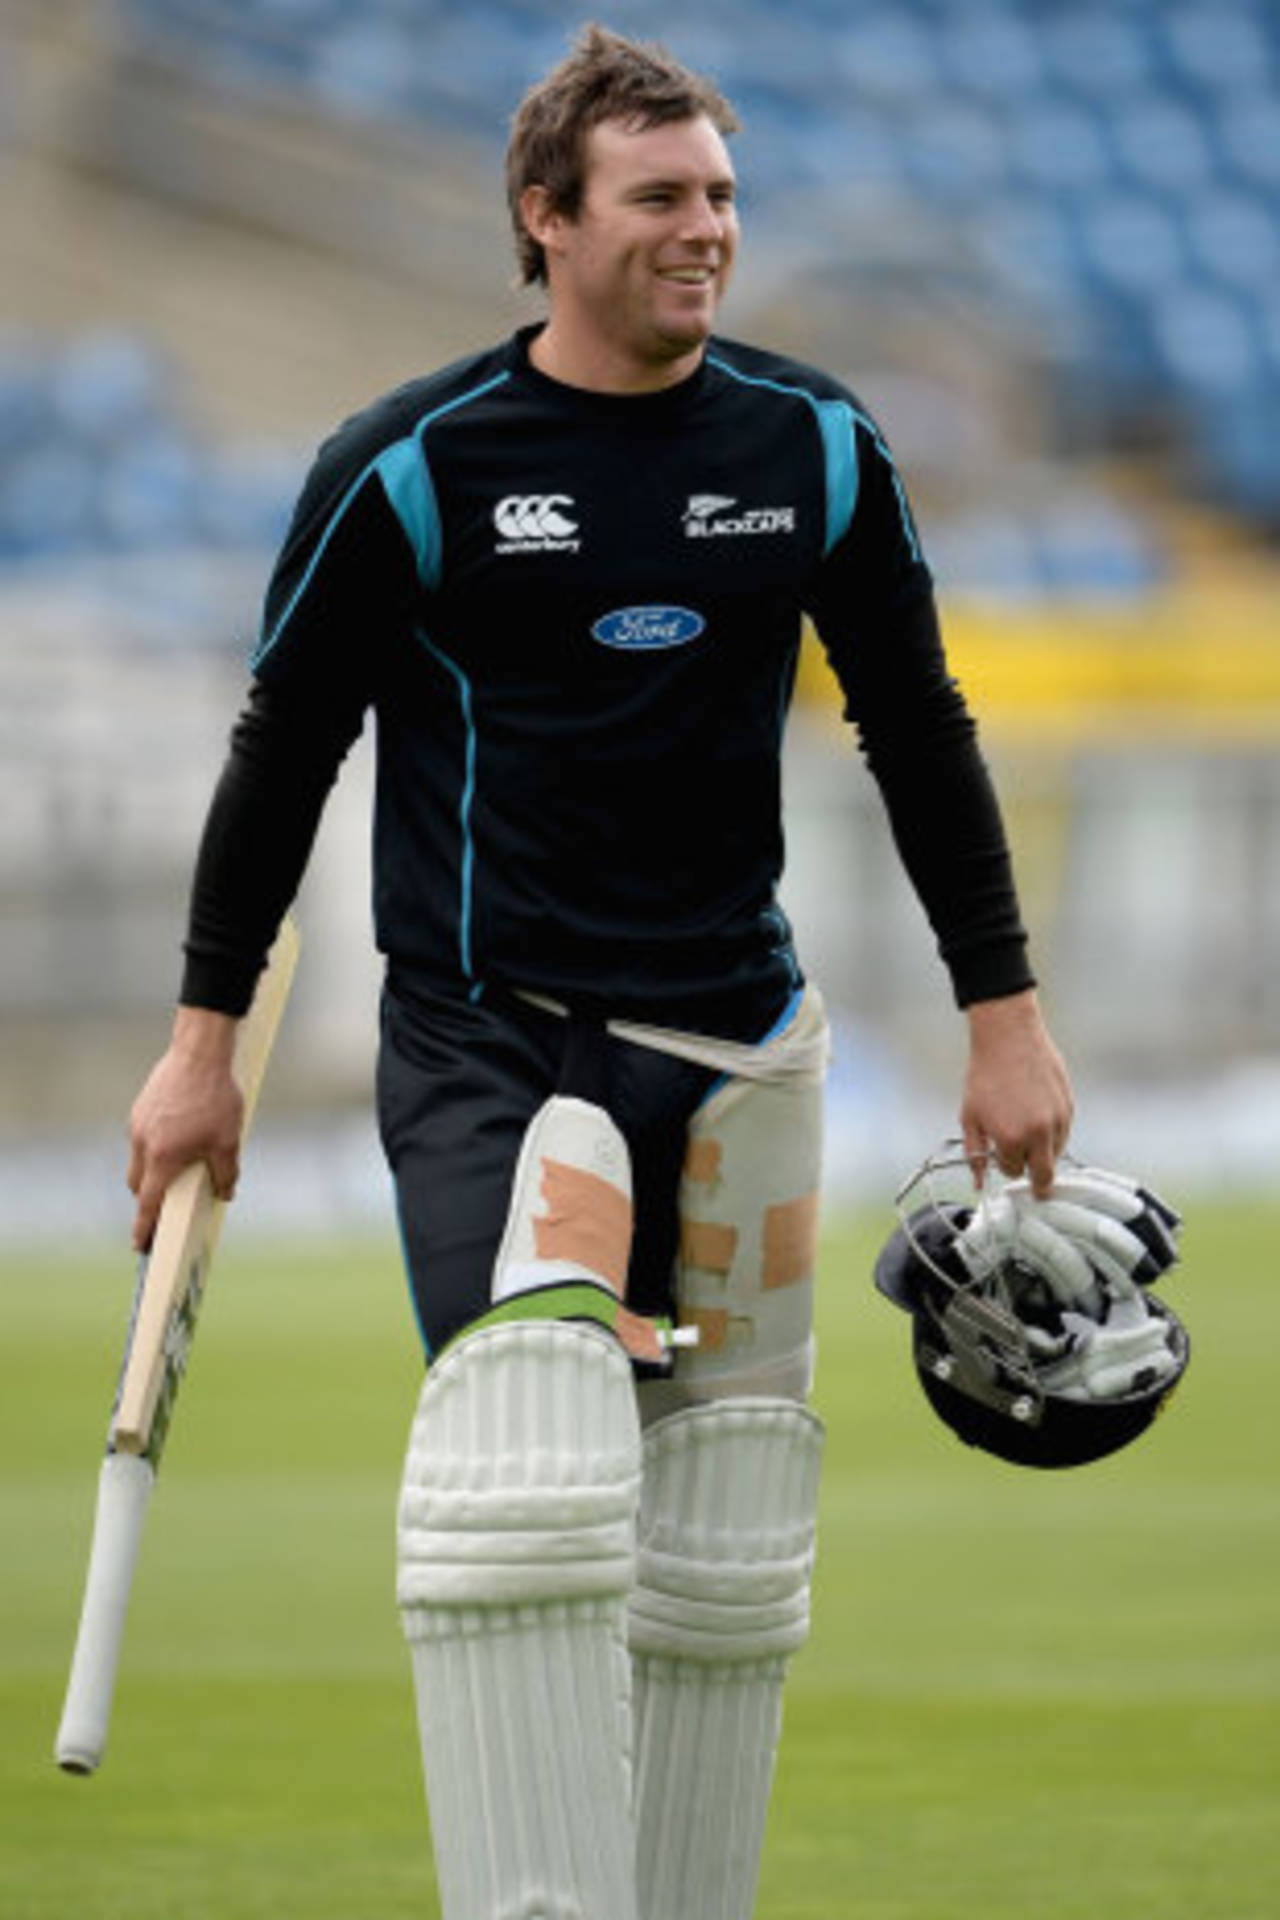 Doug Bracewell after a net session in Headingley, May 23, 2013 